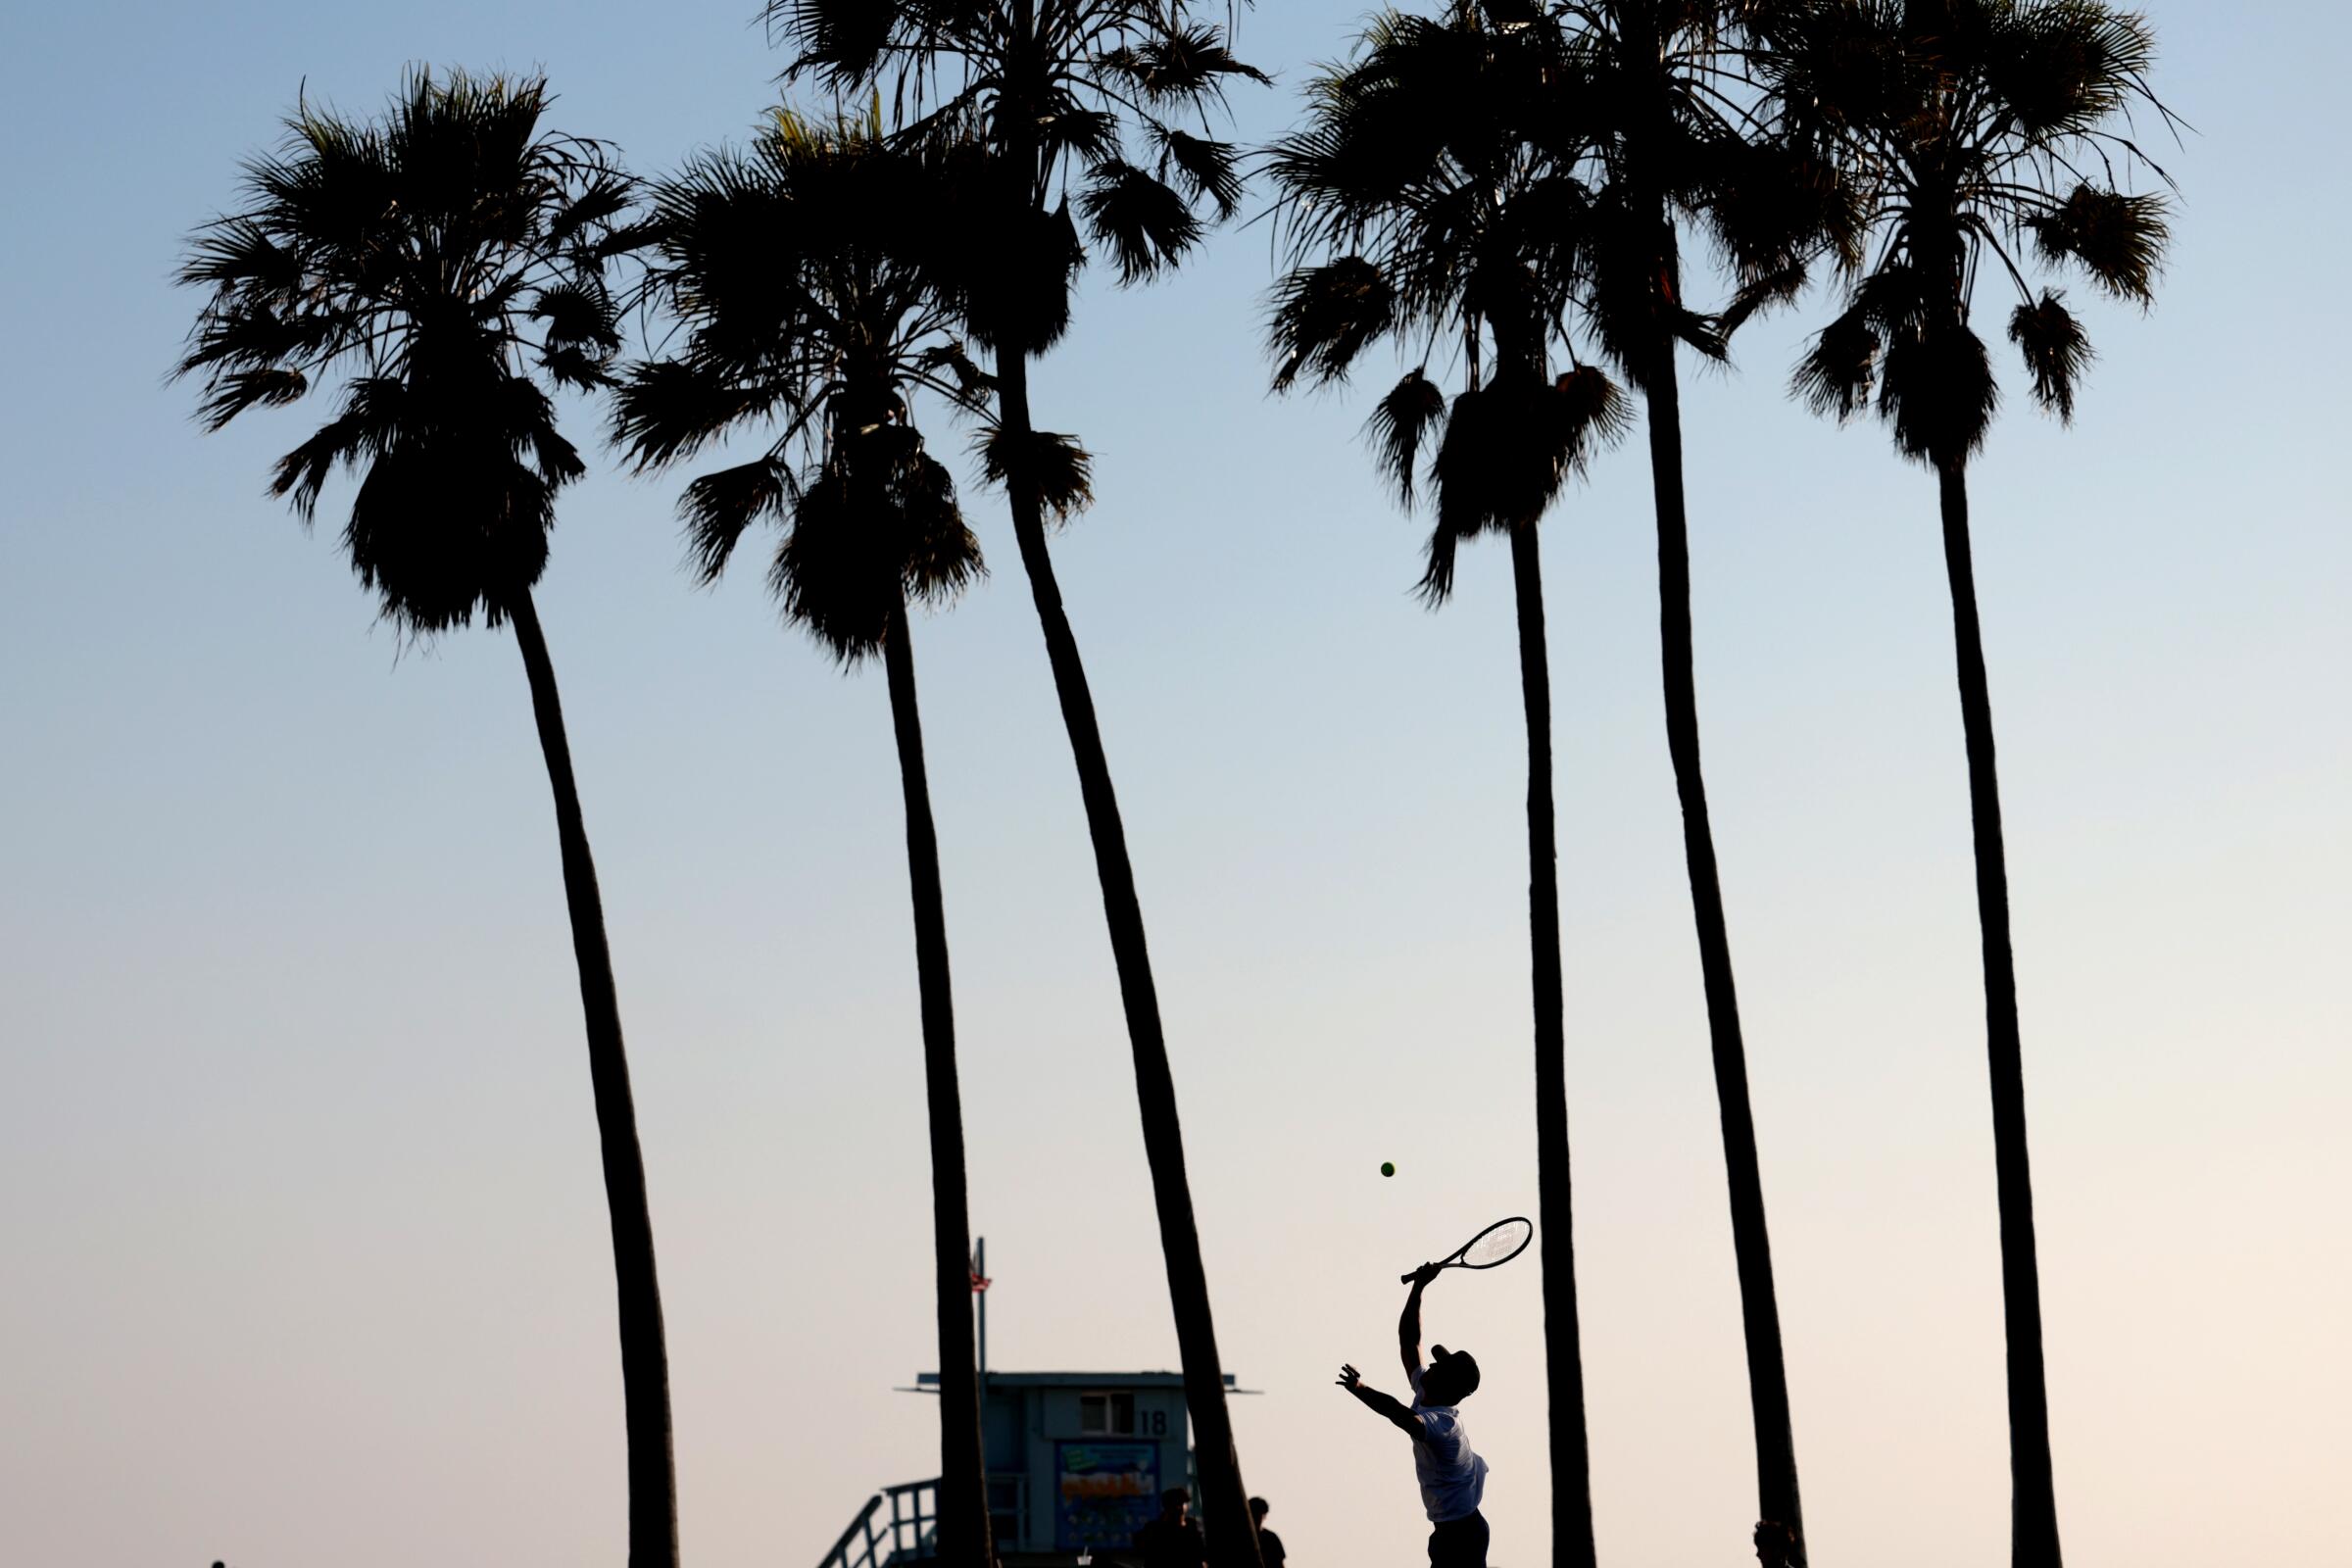 A silhouette of a man and palm trees. The man holds a tennis racket and is about to hit a ball.